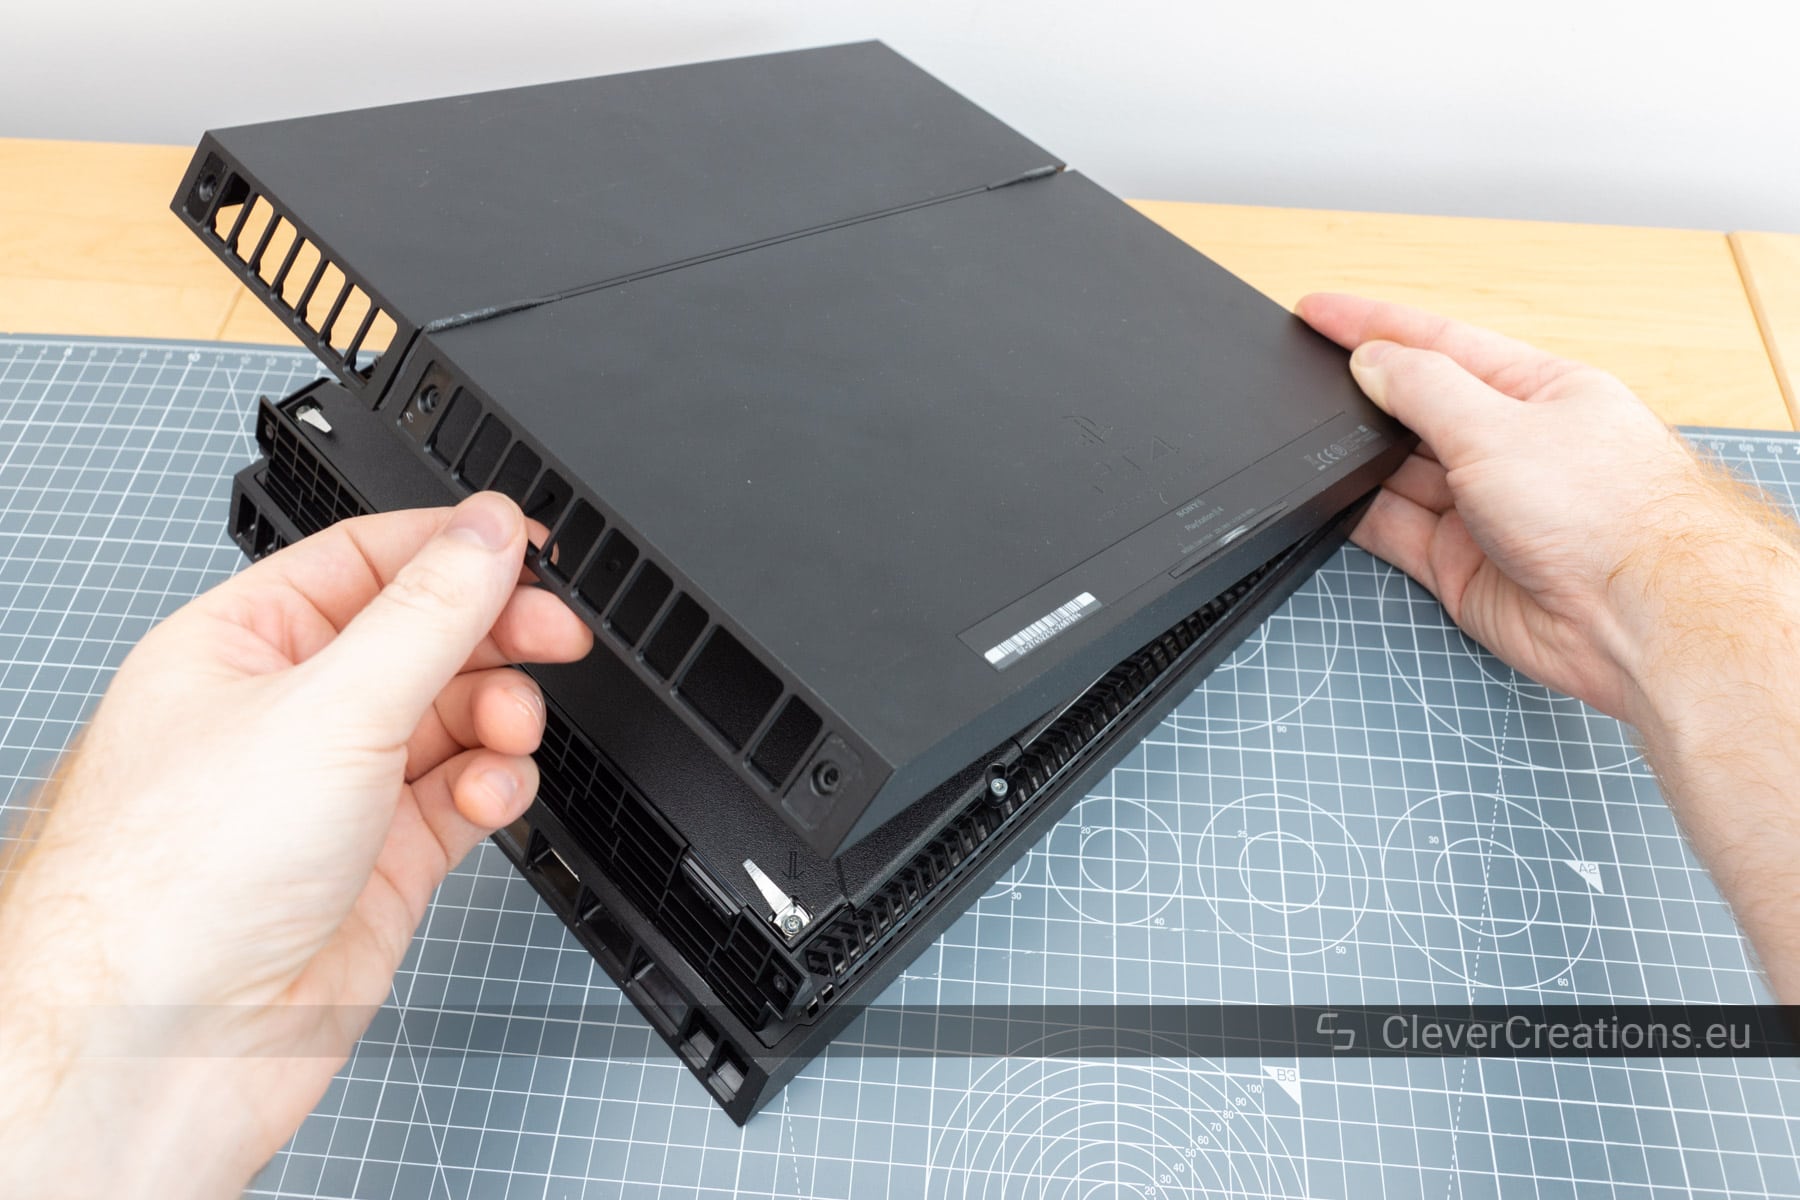 The screws that hold the PS4 power supply in place removed and placed on top of a cutting mat.